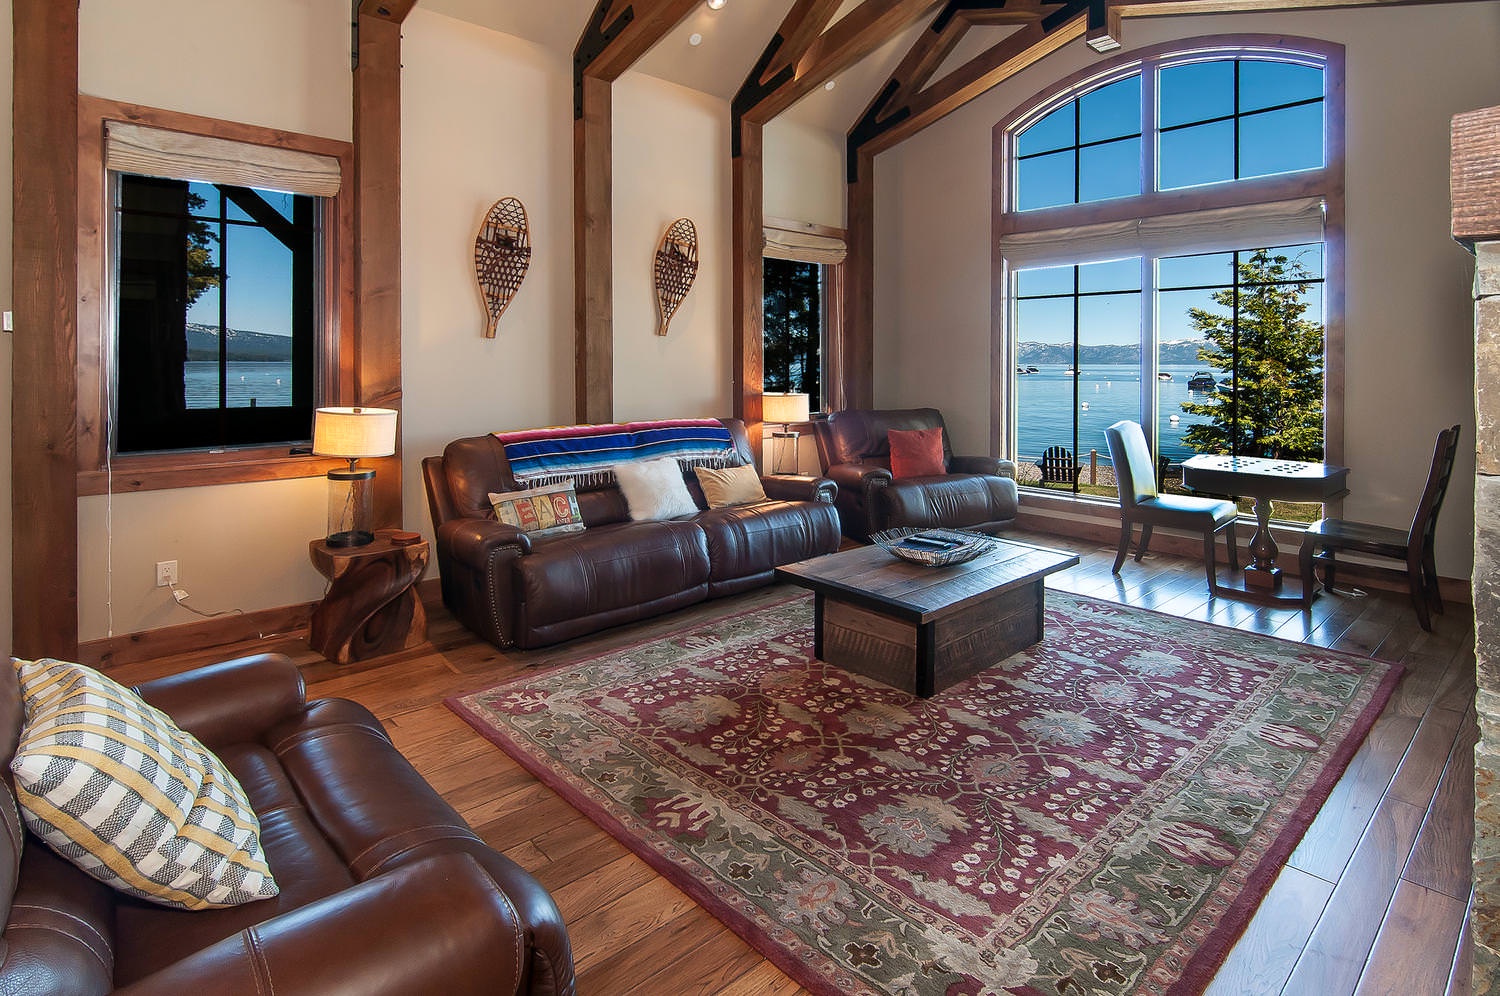 Lake view living room, Smart TV, board games, gas fireplace